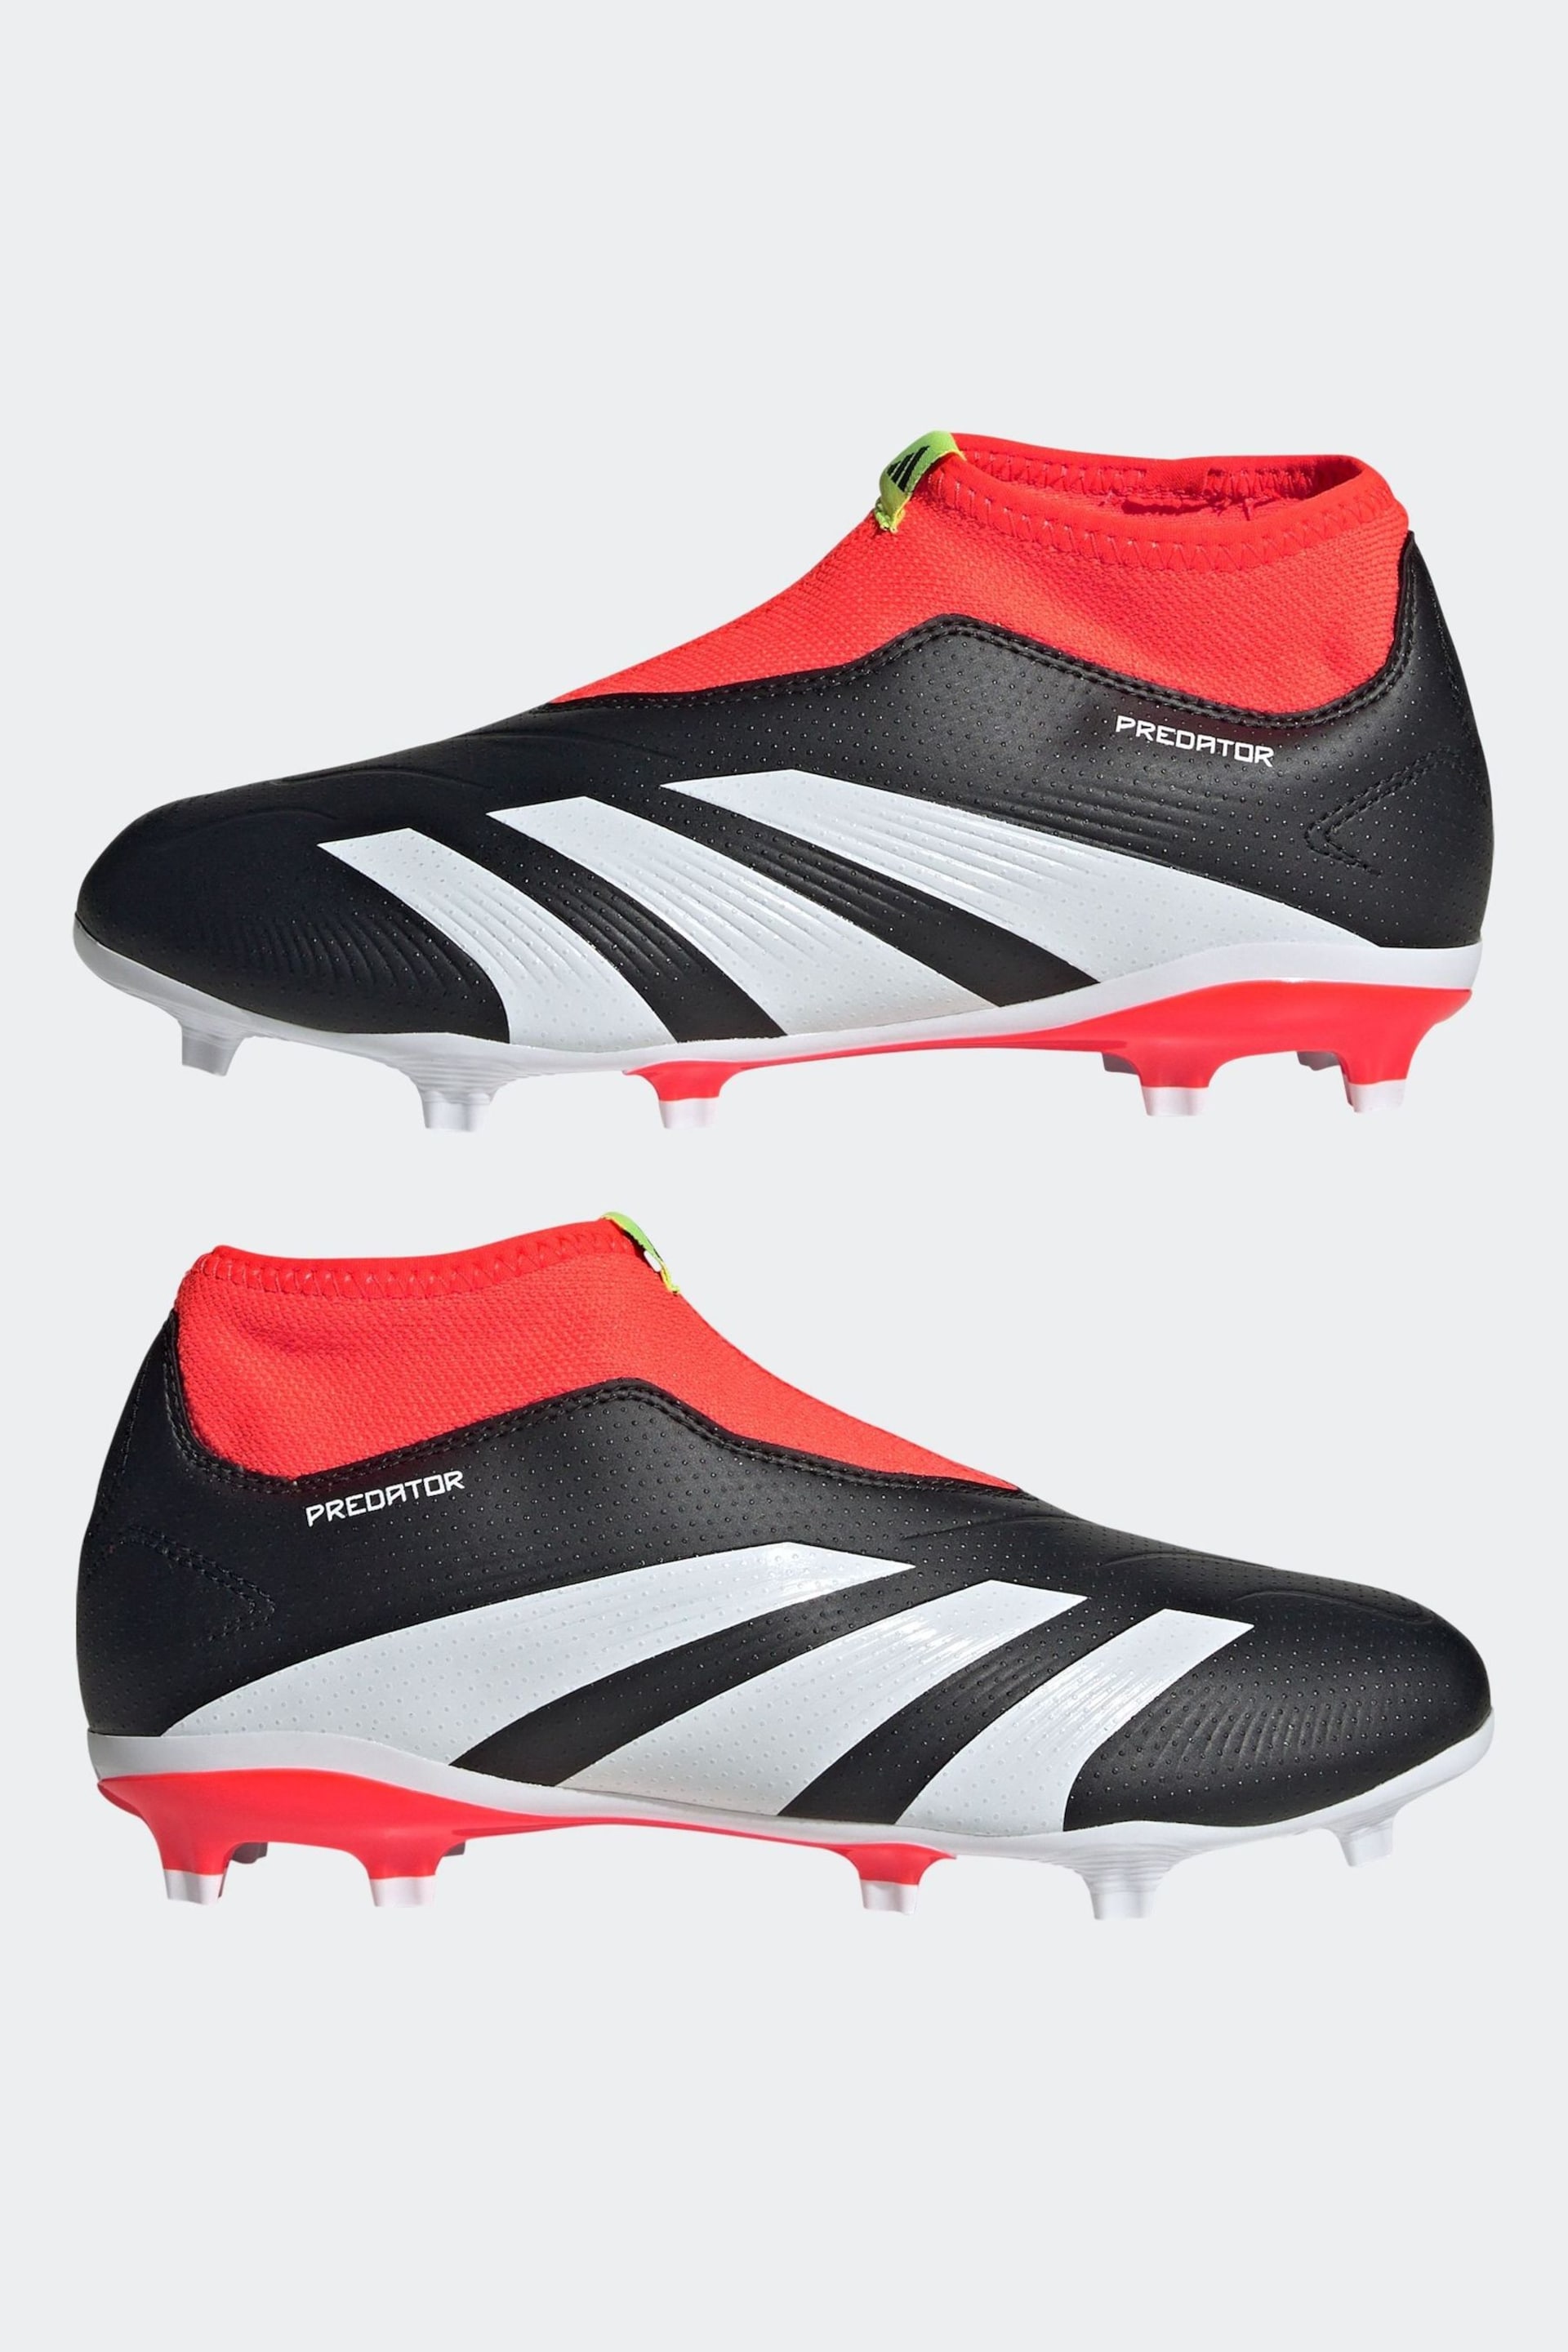 adidas Black Football Predator 24 League Laceless Firm Ground Kids Boots - Image 6 of 9